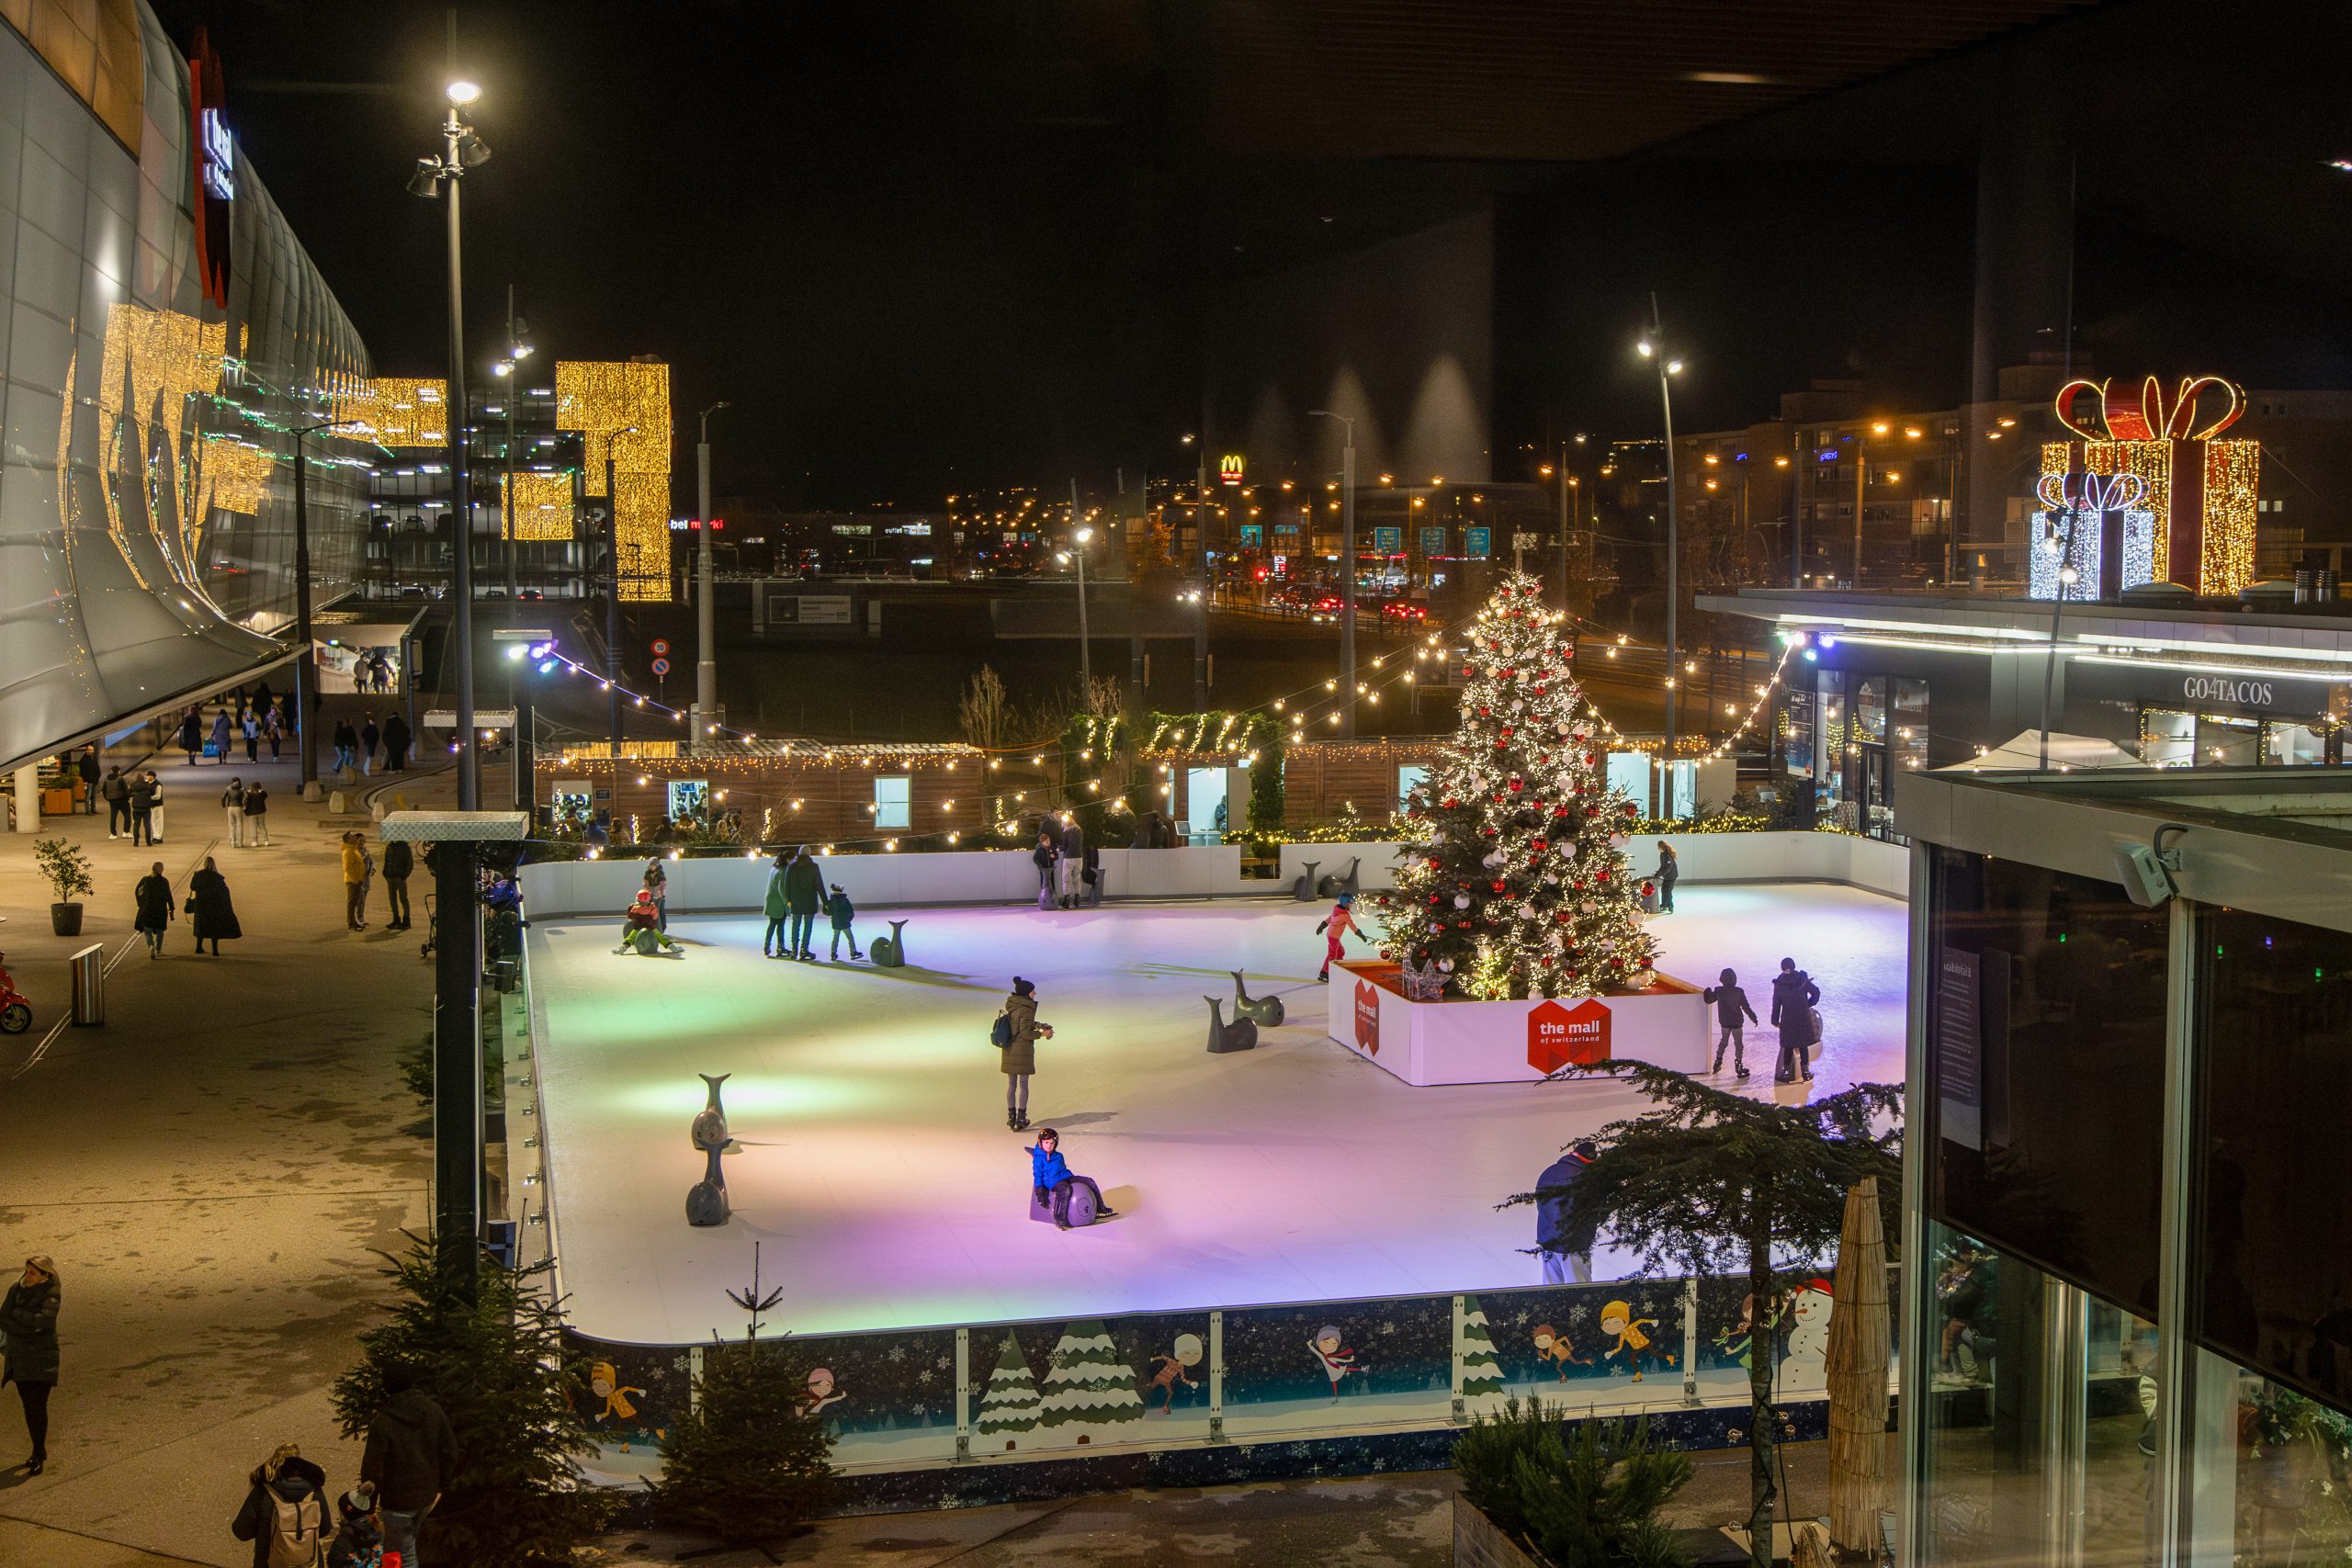 A Skating Spectacle Draws Crowds and Cheers at the Mall of Switzerland